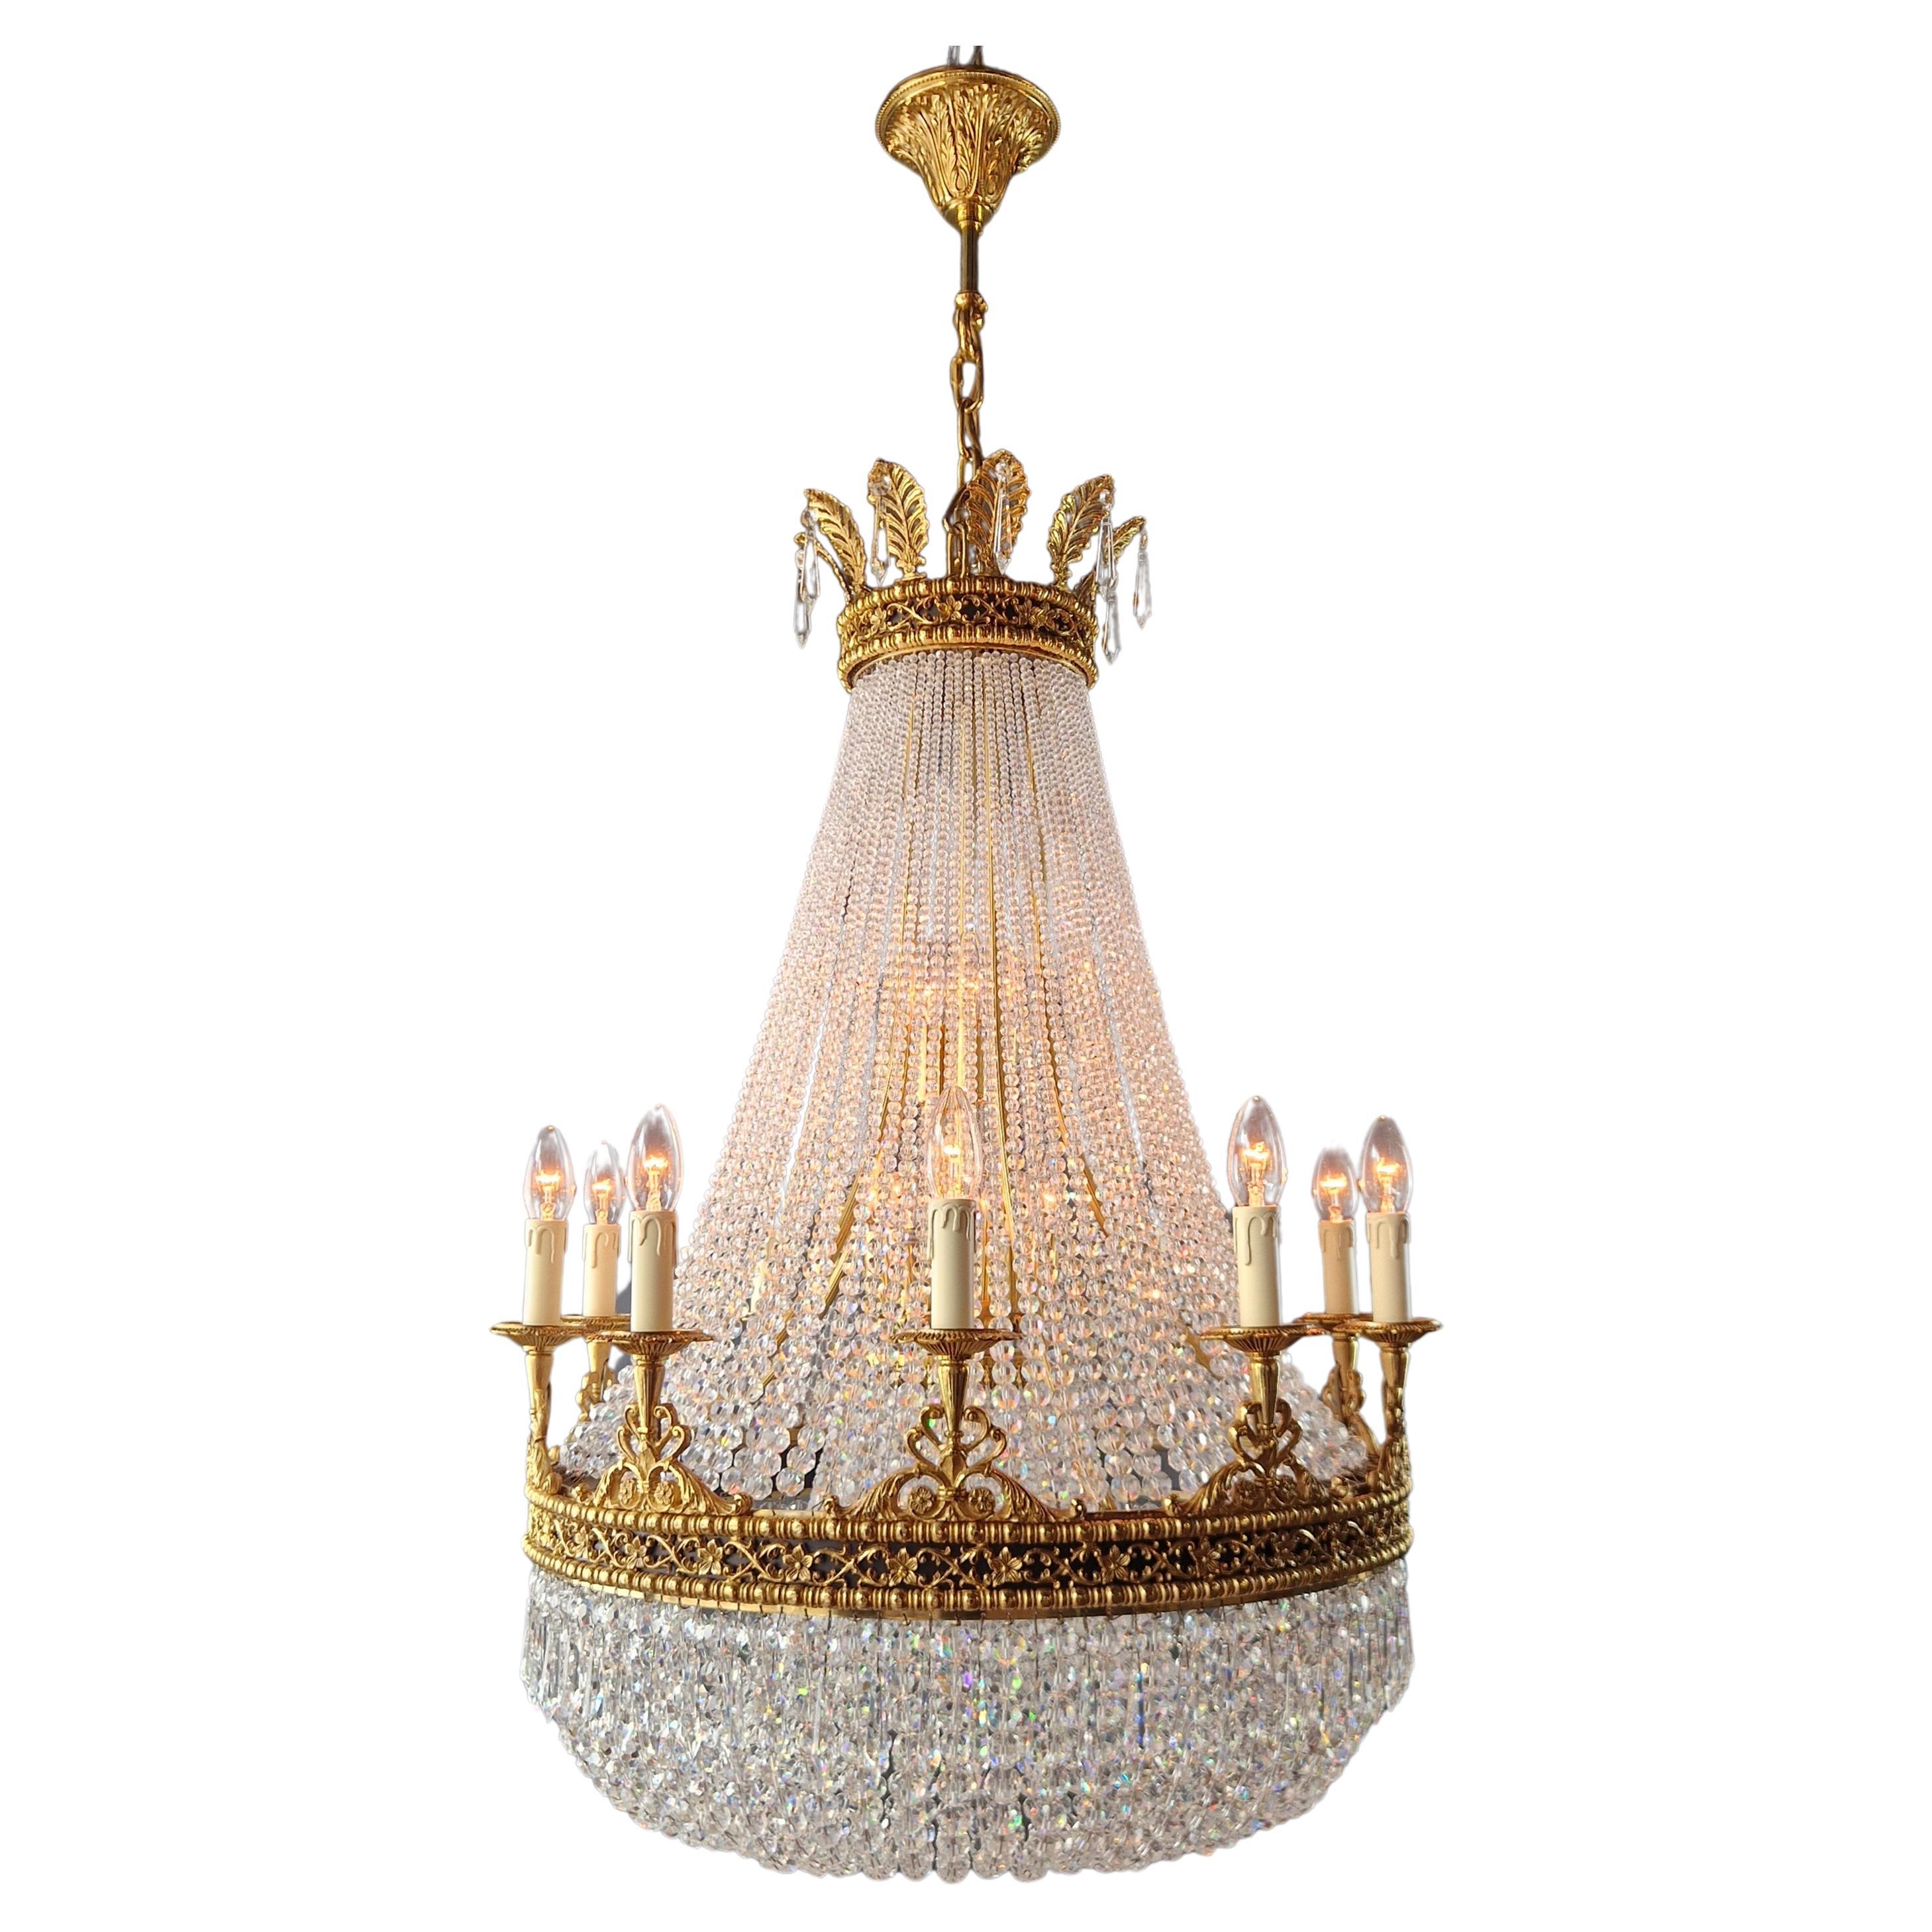 Brass Basket Empire Sac a Pearl Chandelier Beaded Crystal Lustre Lamp Antique For Sale